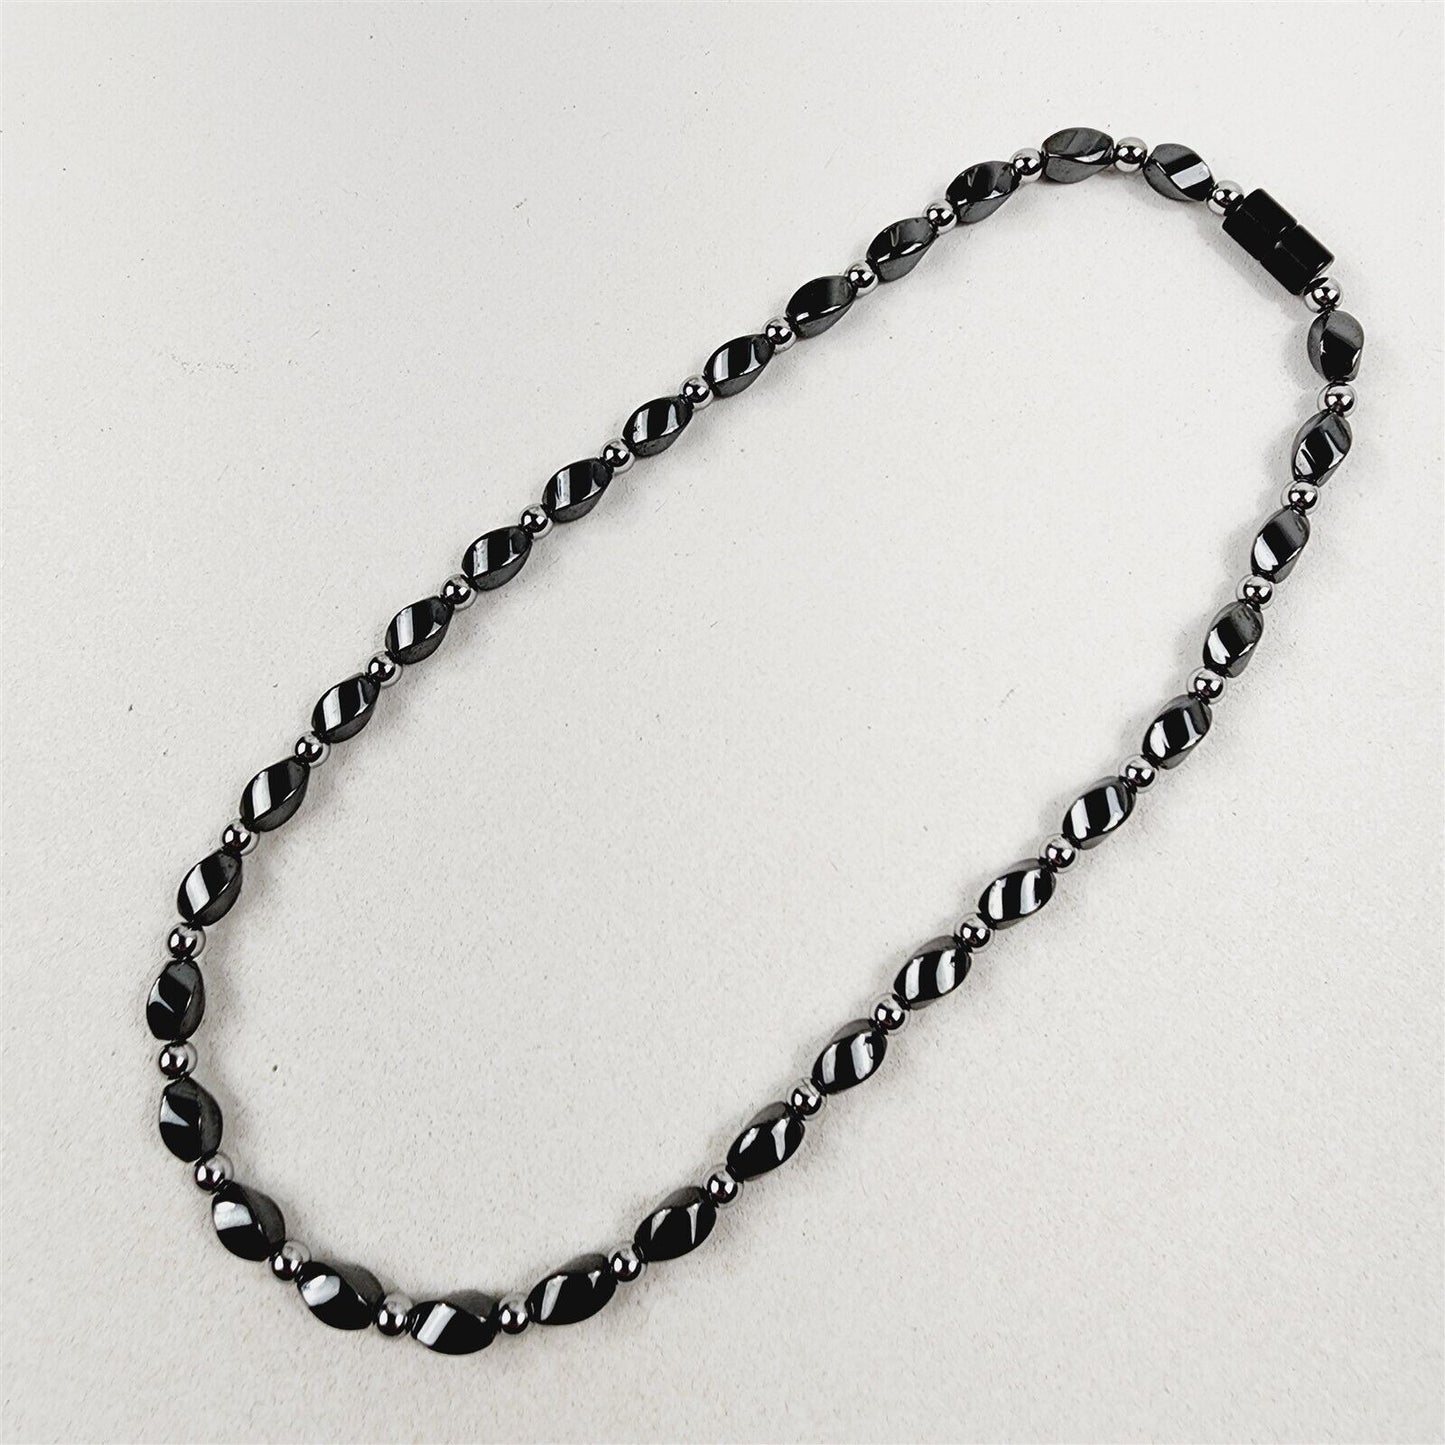 Black & Silver Short Twist Magnetic Beaded Necklace Therapeutic Handmade